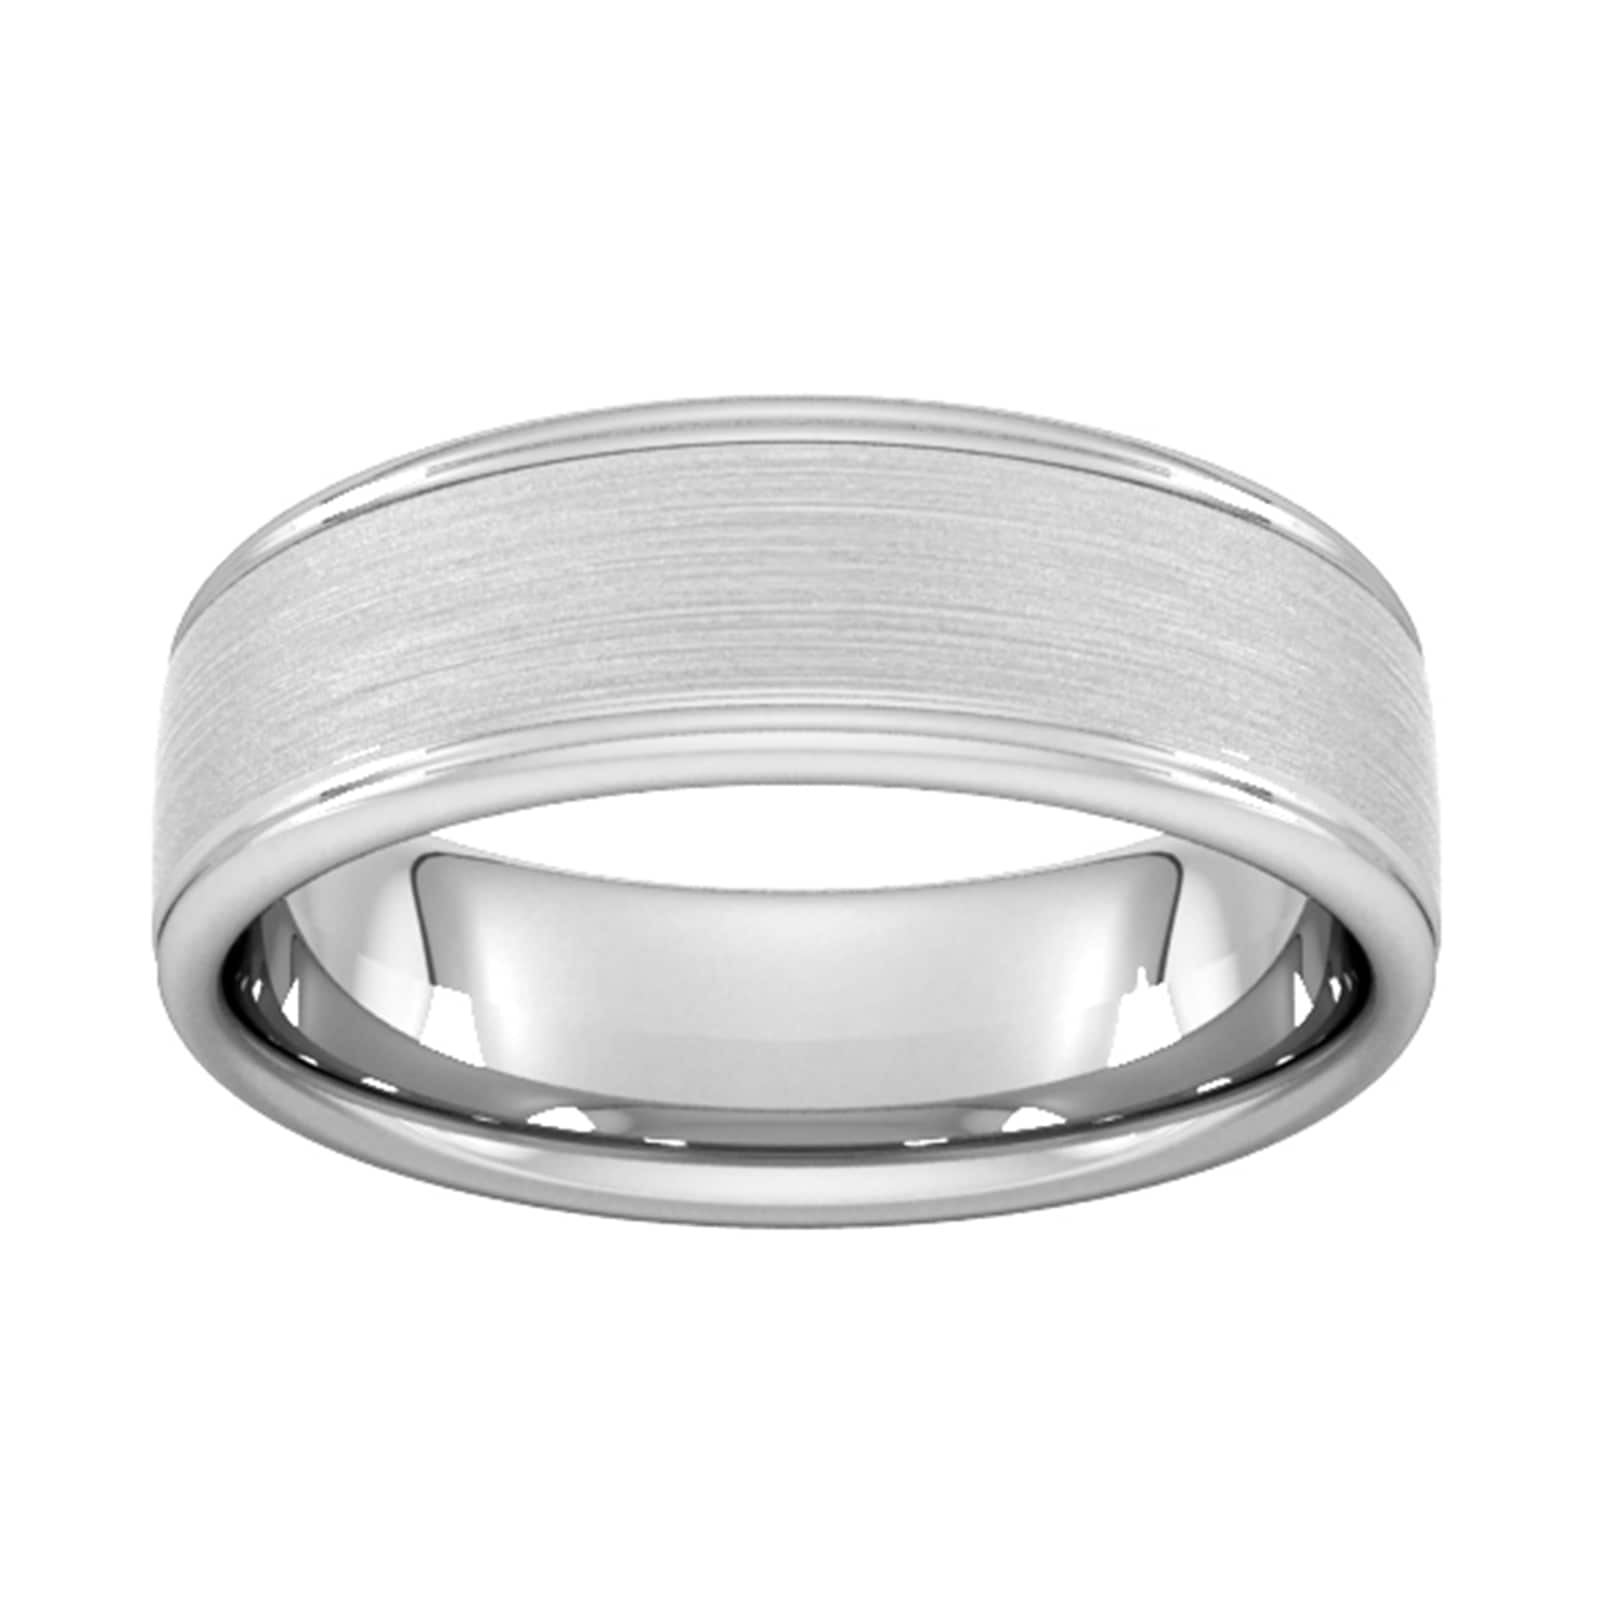 7mm Slight Court Heavy Matt Centre With Grooves Wedding Ring In 18 Carat White Gold - Ring Size L